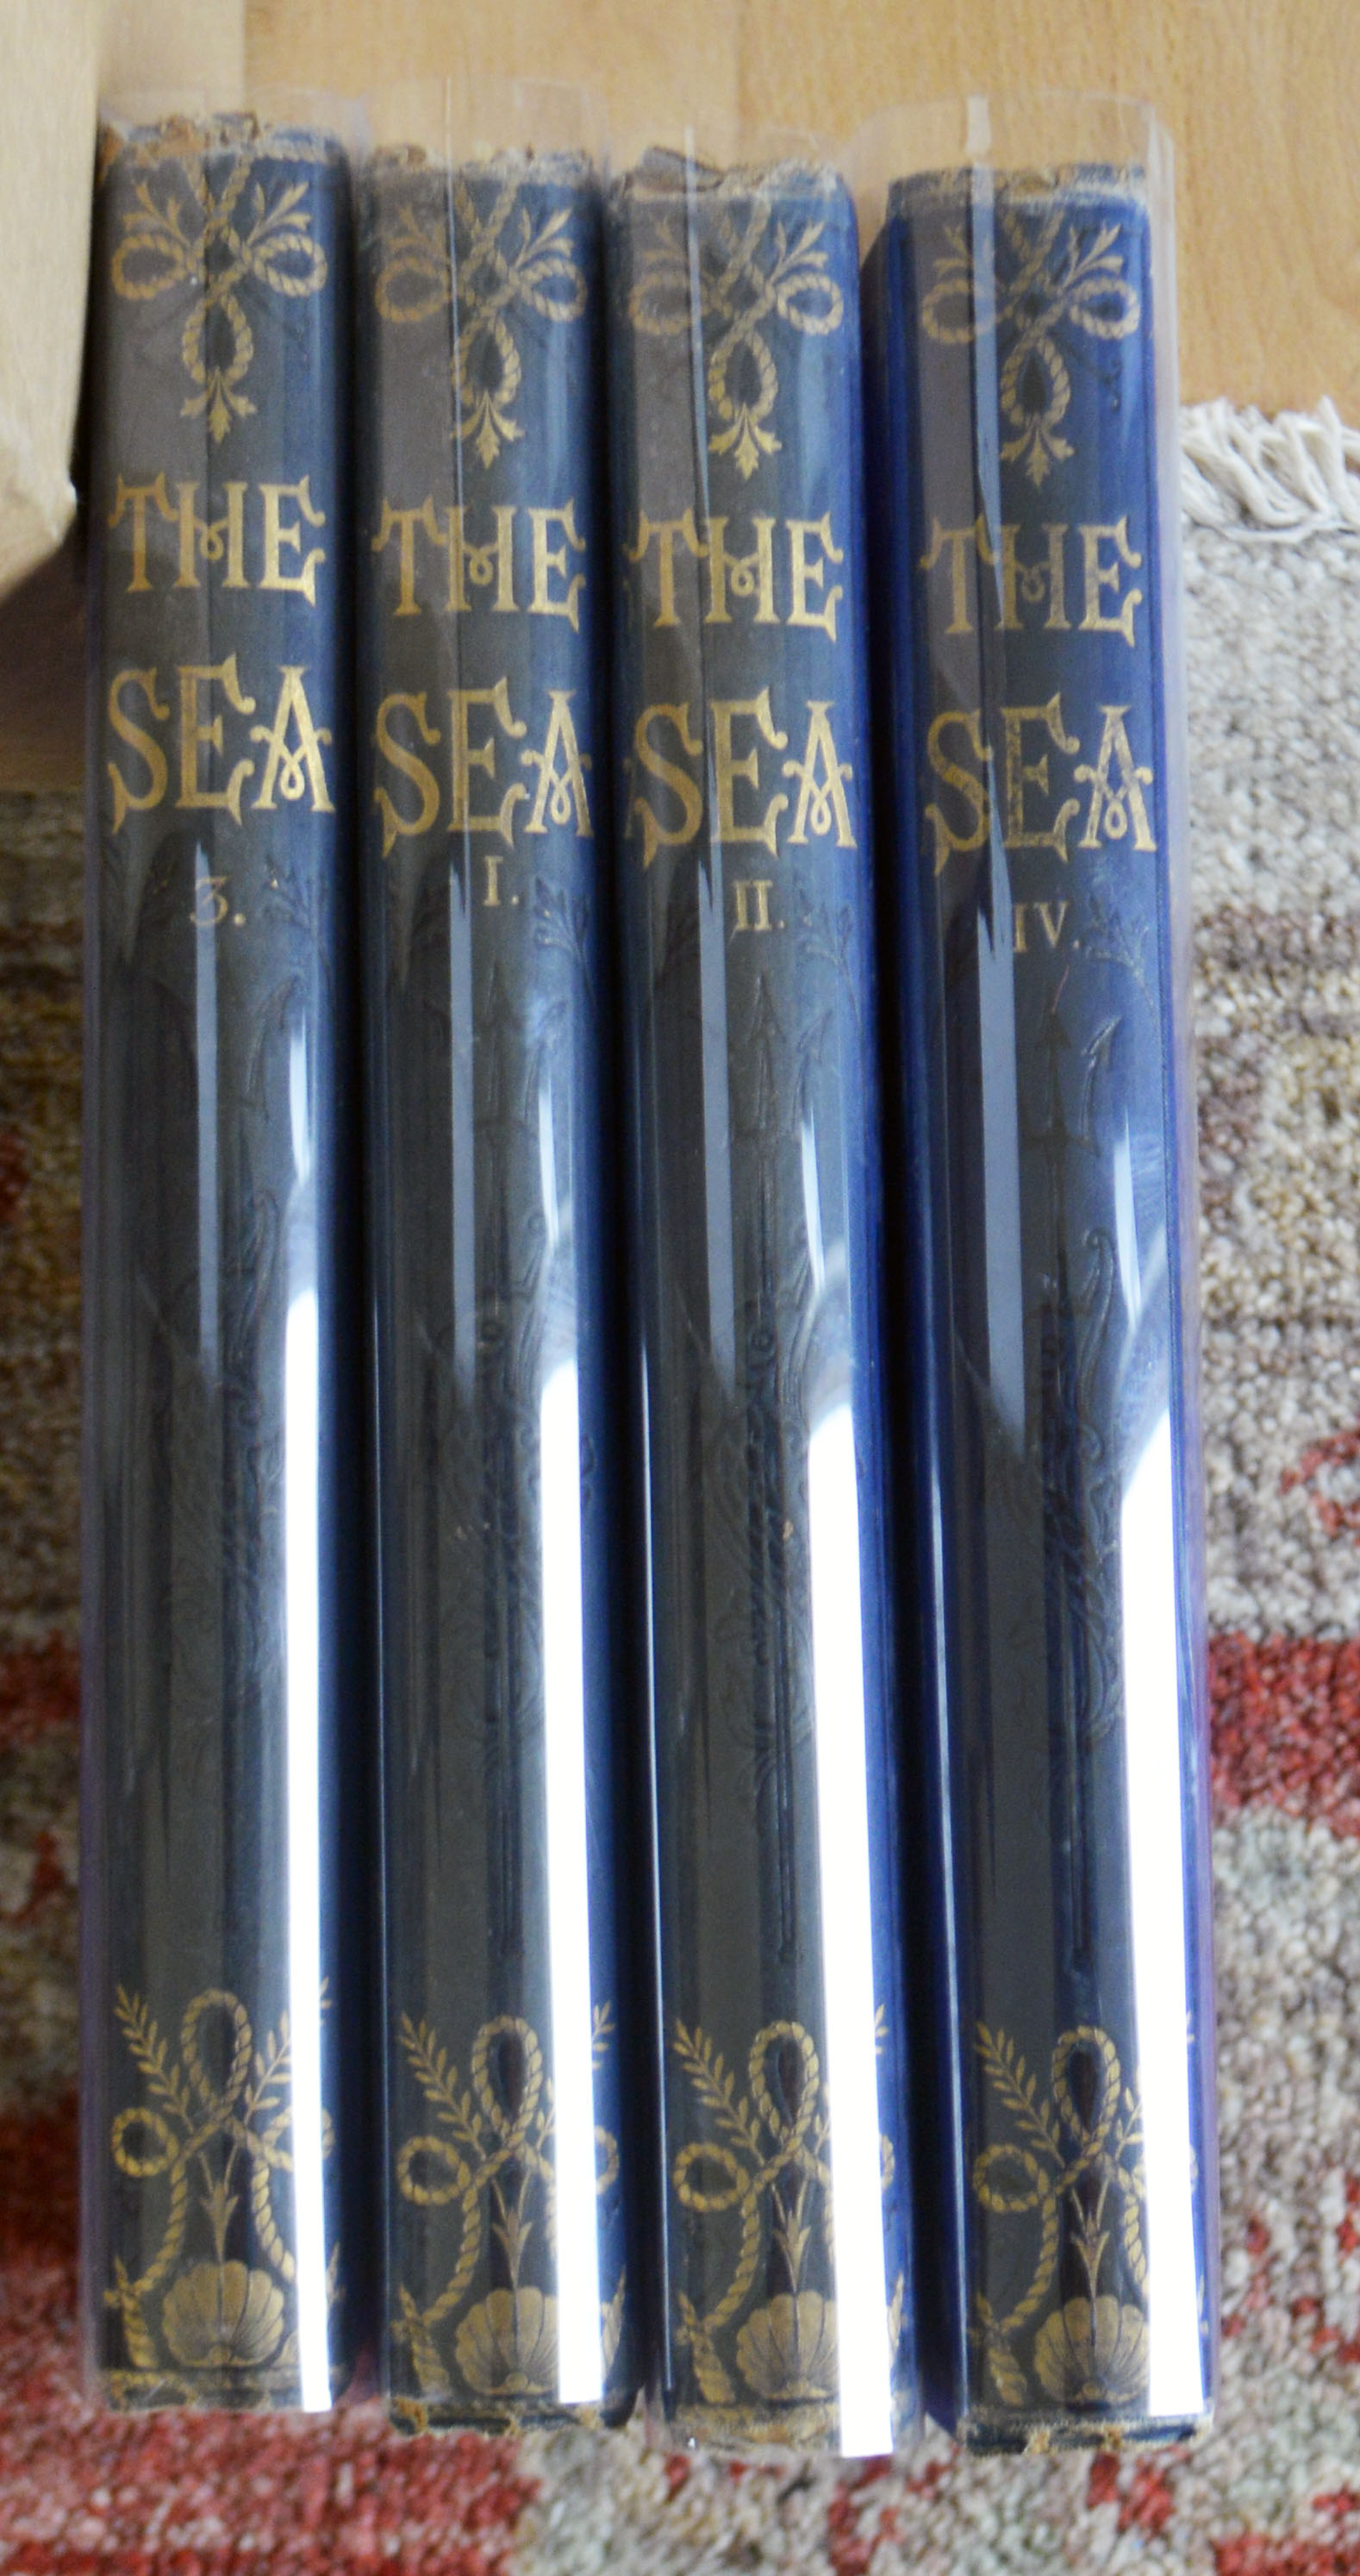 F Whymper. The Sea. It's Stirring Story of Adventure, Peril and Heroism c.1887 Set of 4 [Book] - Image 2 of 3